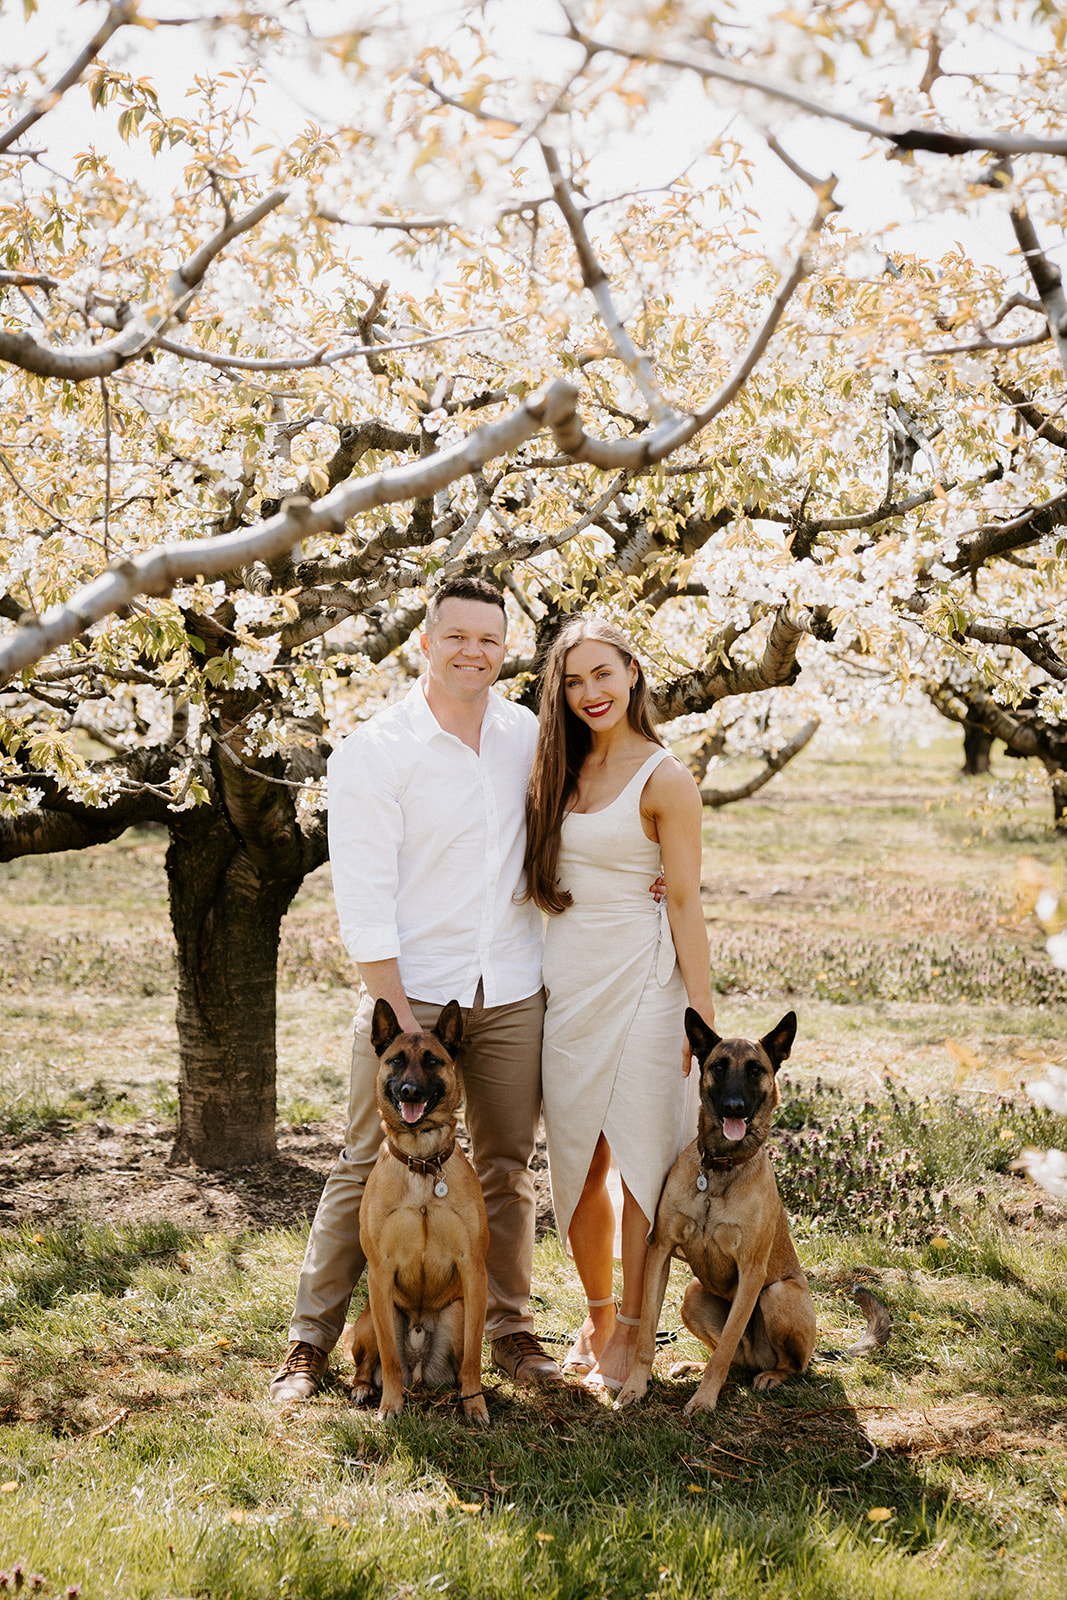 A couple and two dogs standing underneath a cherry blossom tree.